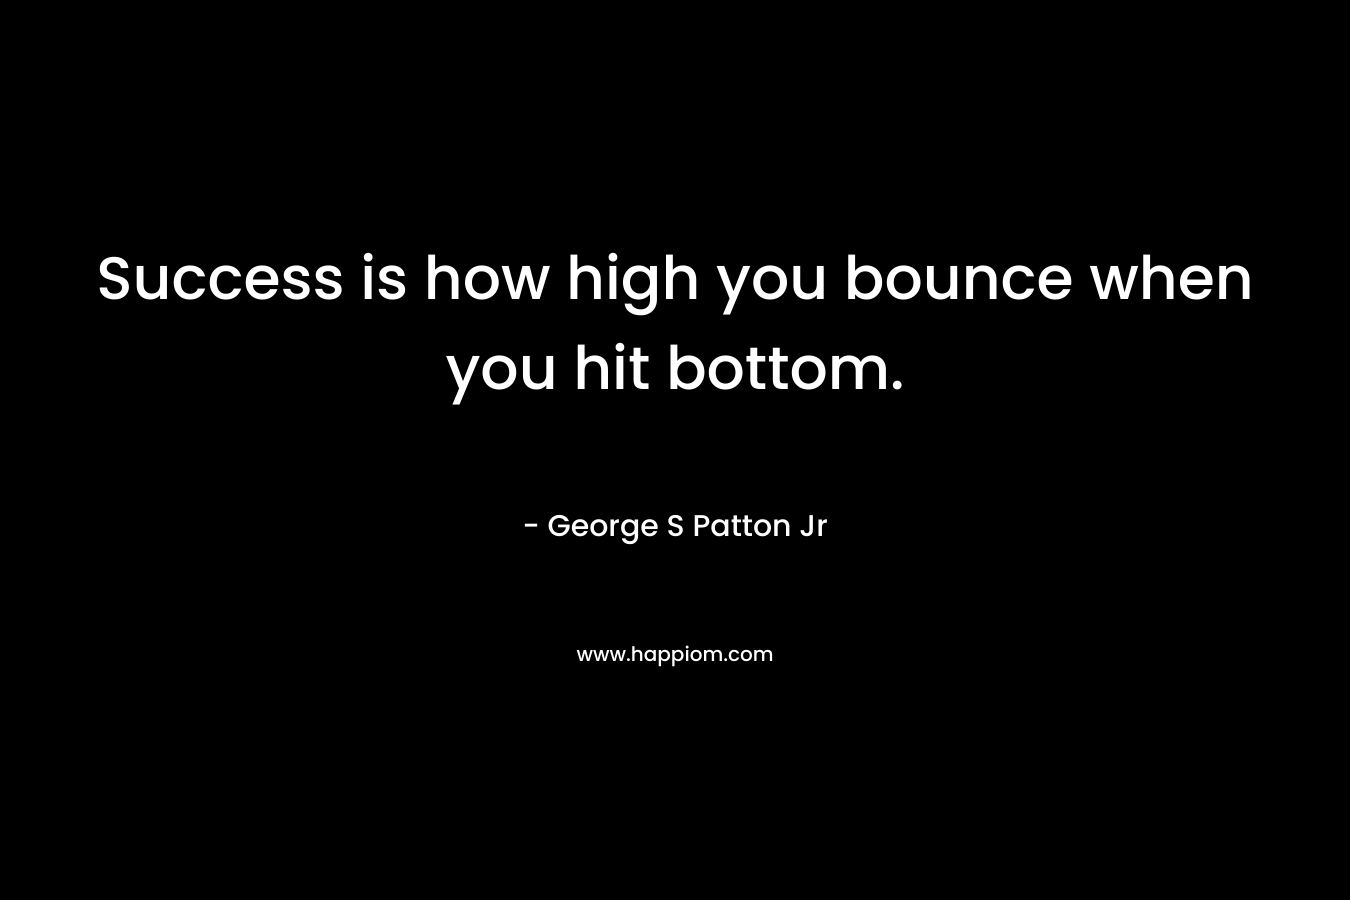 Success is how high you bounce when you hit bottom. – George S Patton Jr